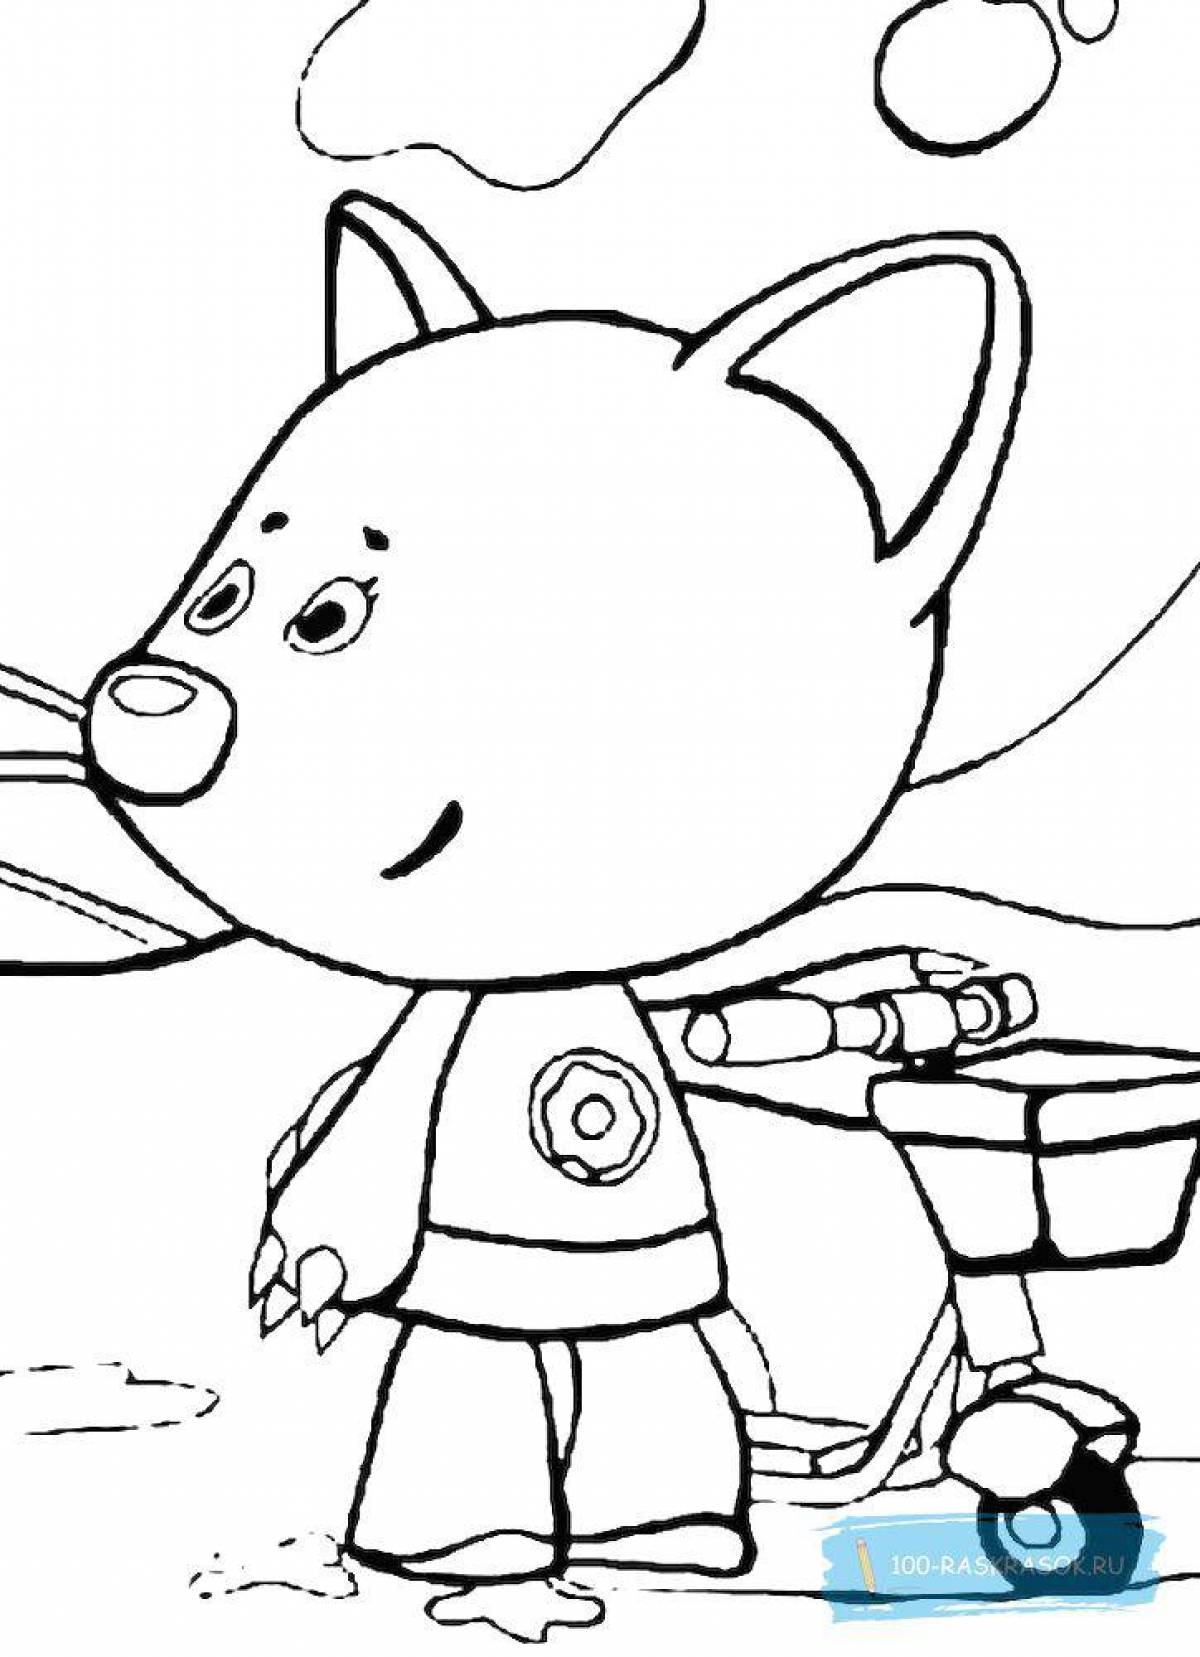 Fancy bear coloring pages